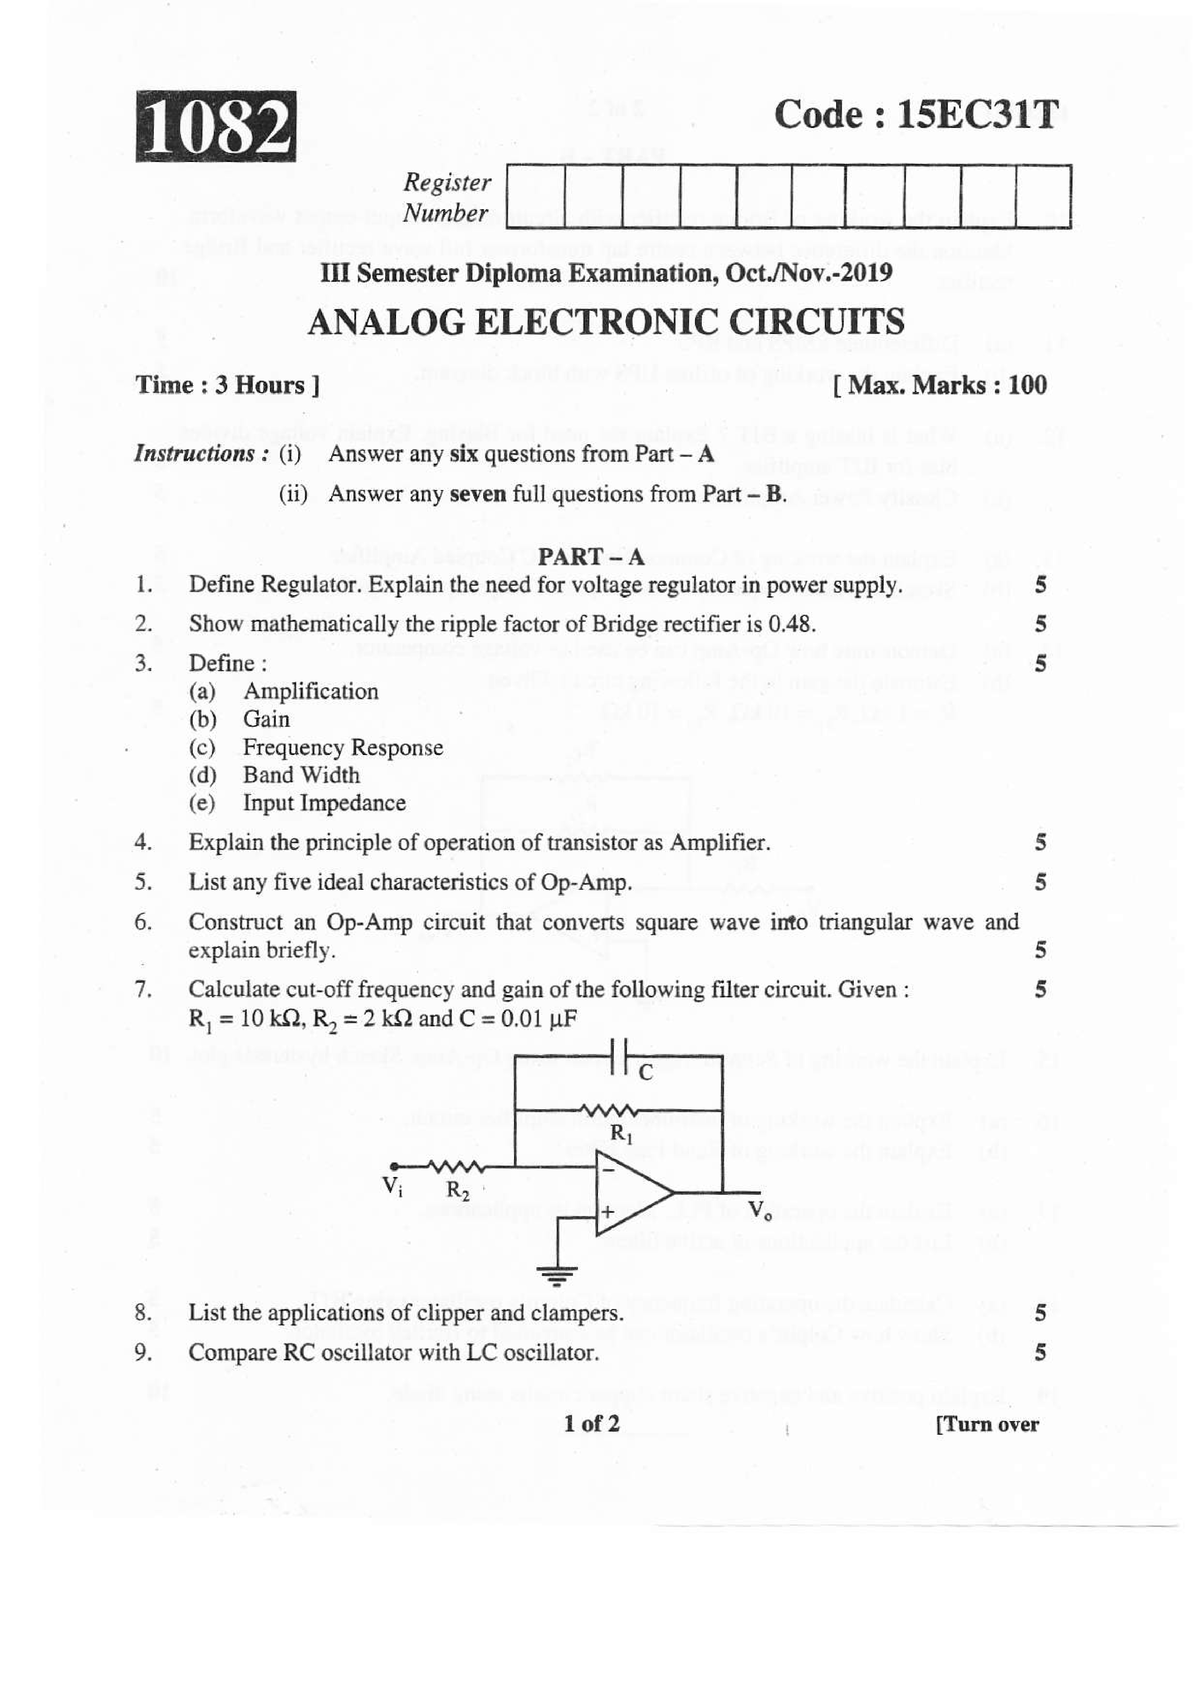 research papers for analog electronics